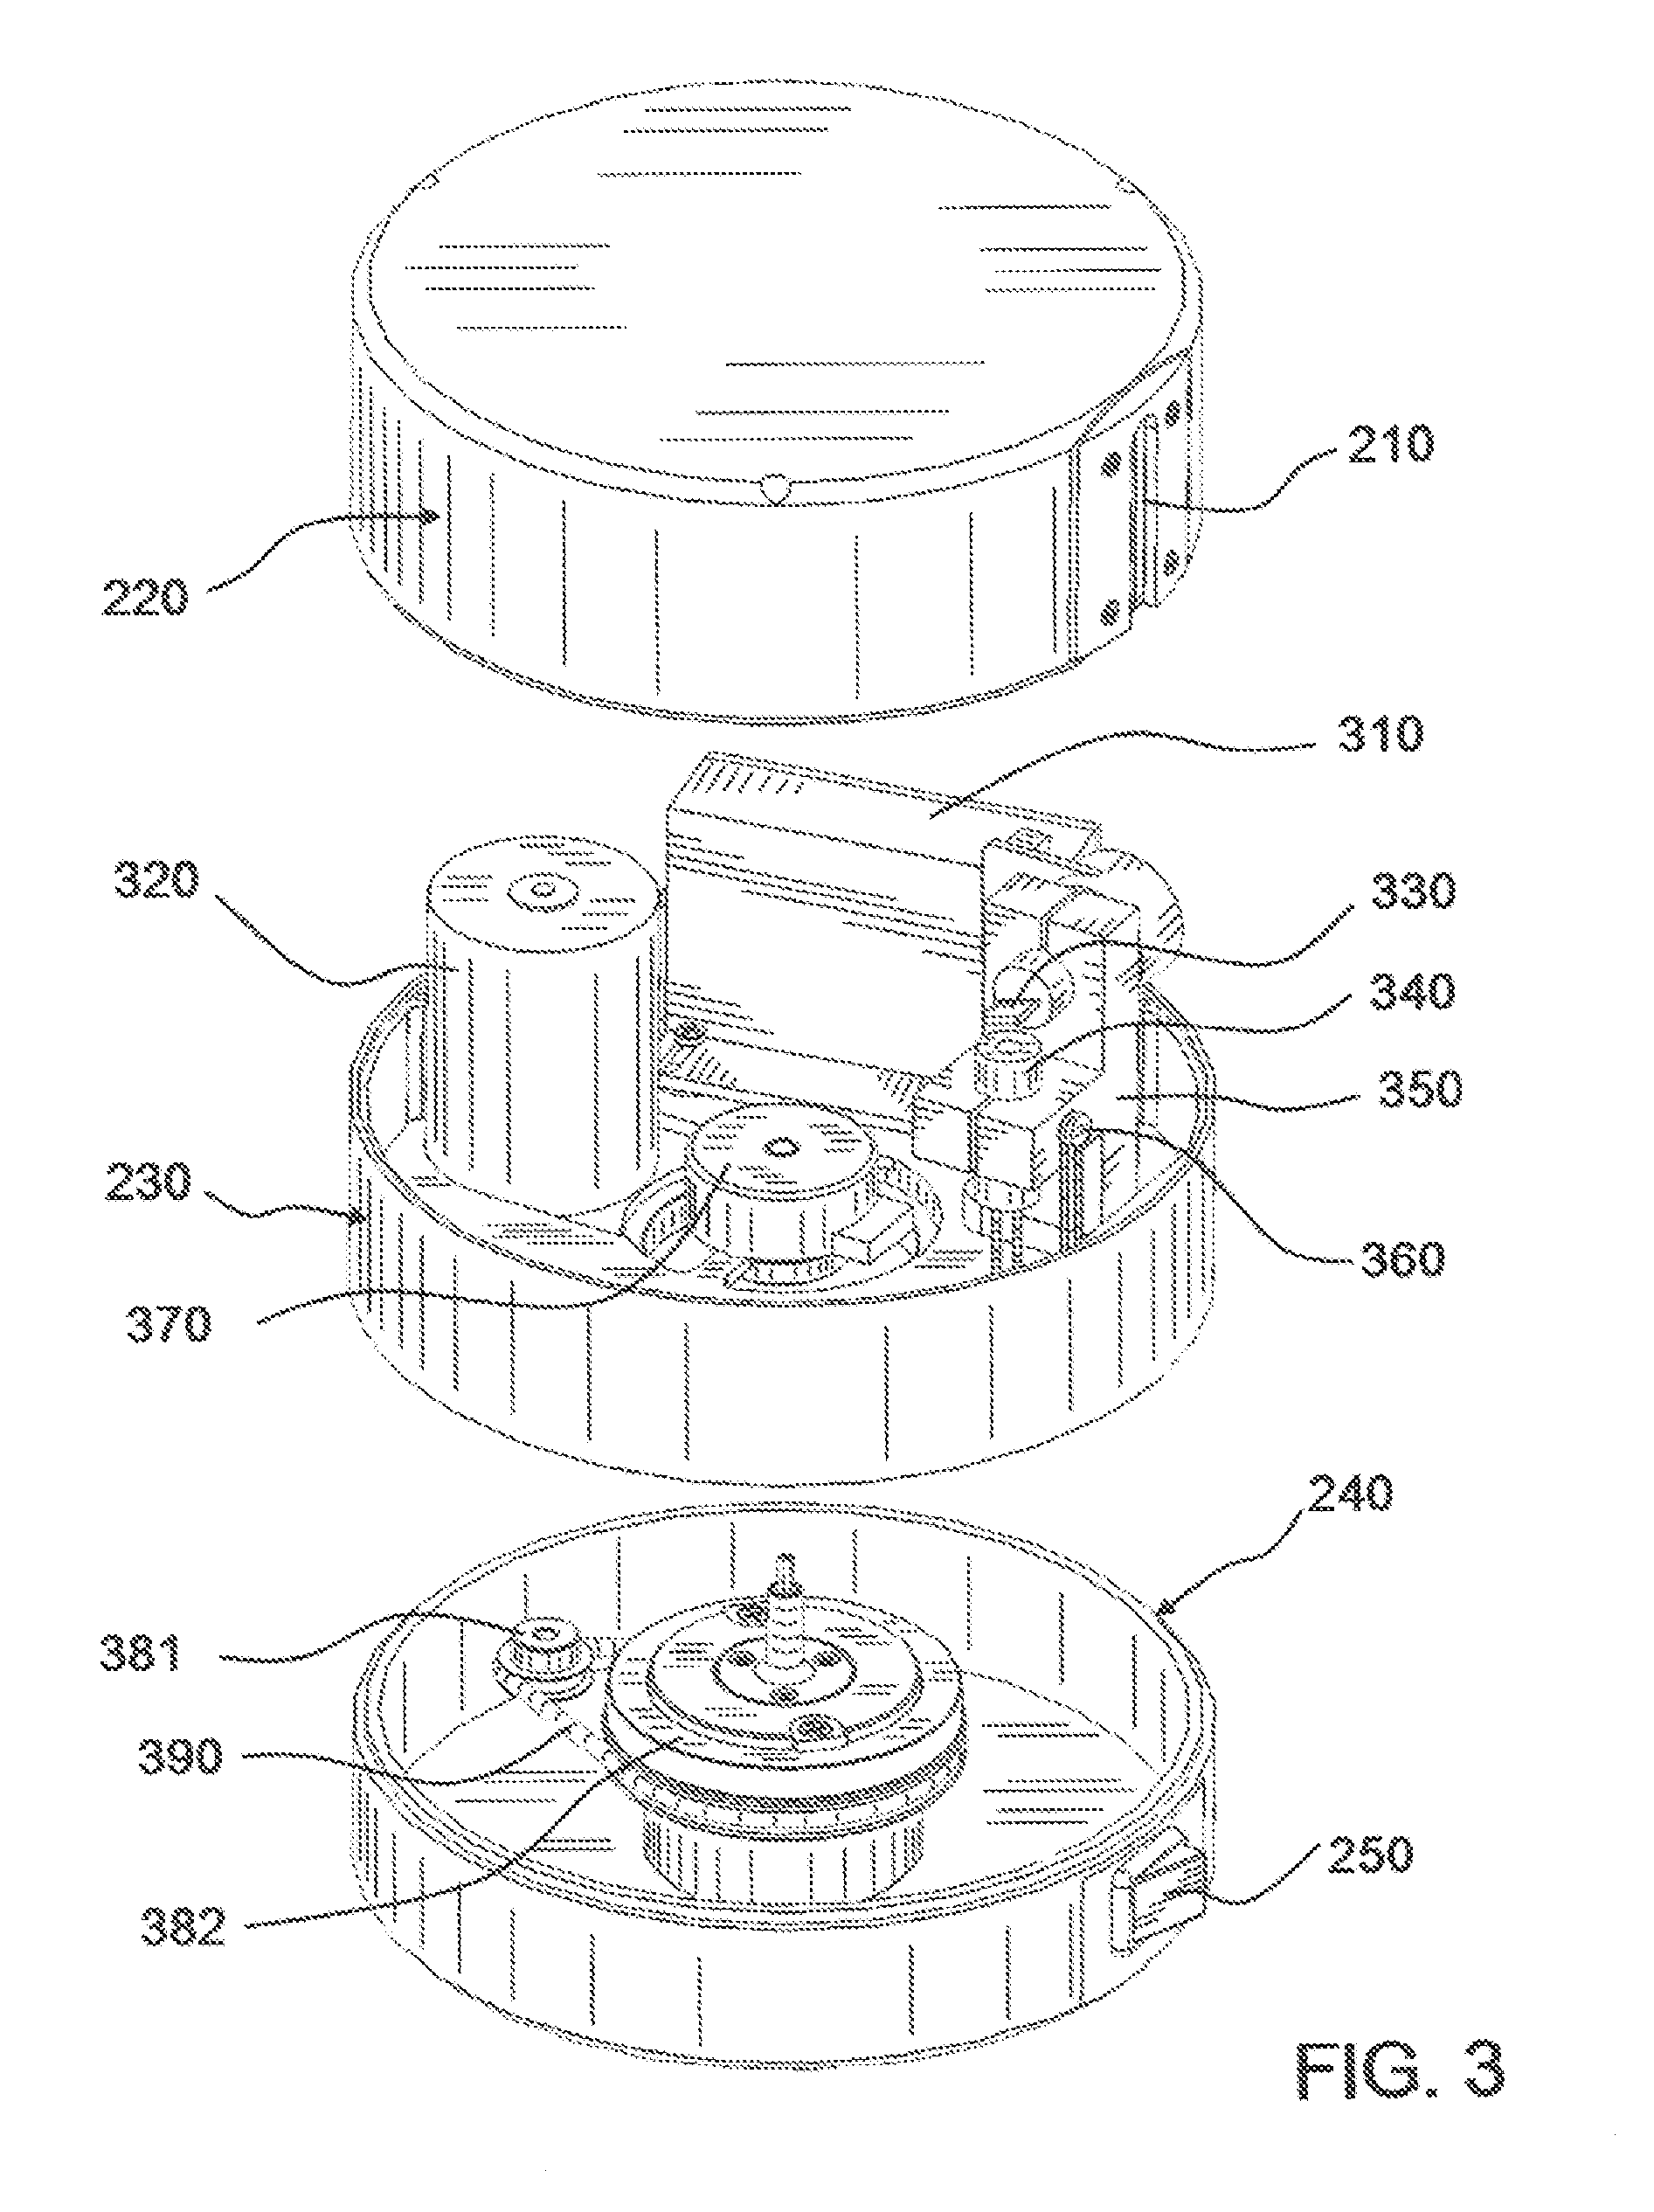 Apparatus and method to indicate a specified position using two or more intersecting lasers lines